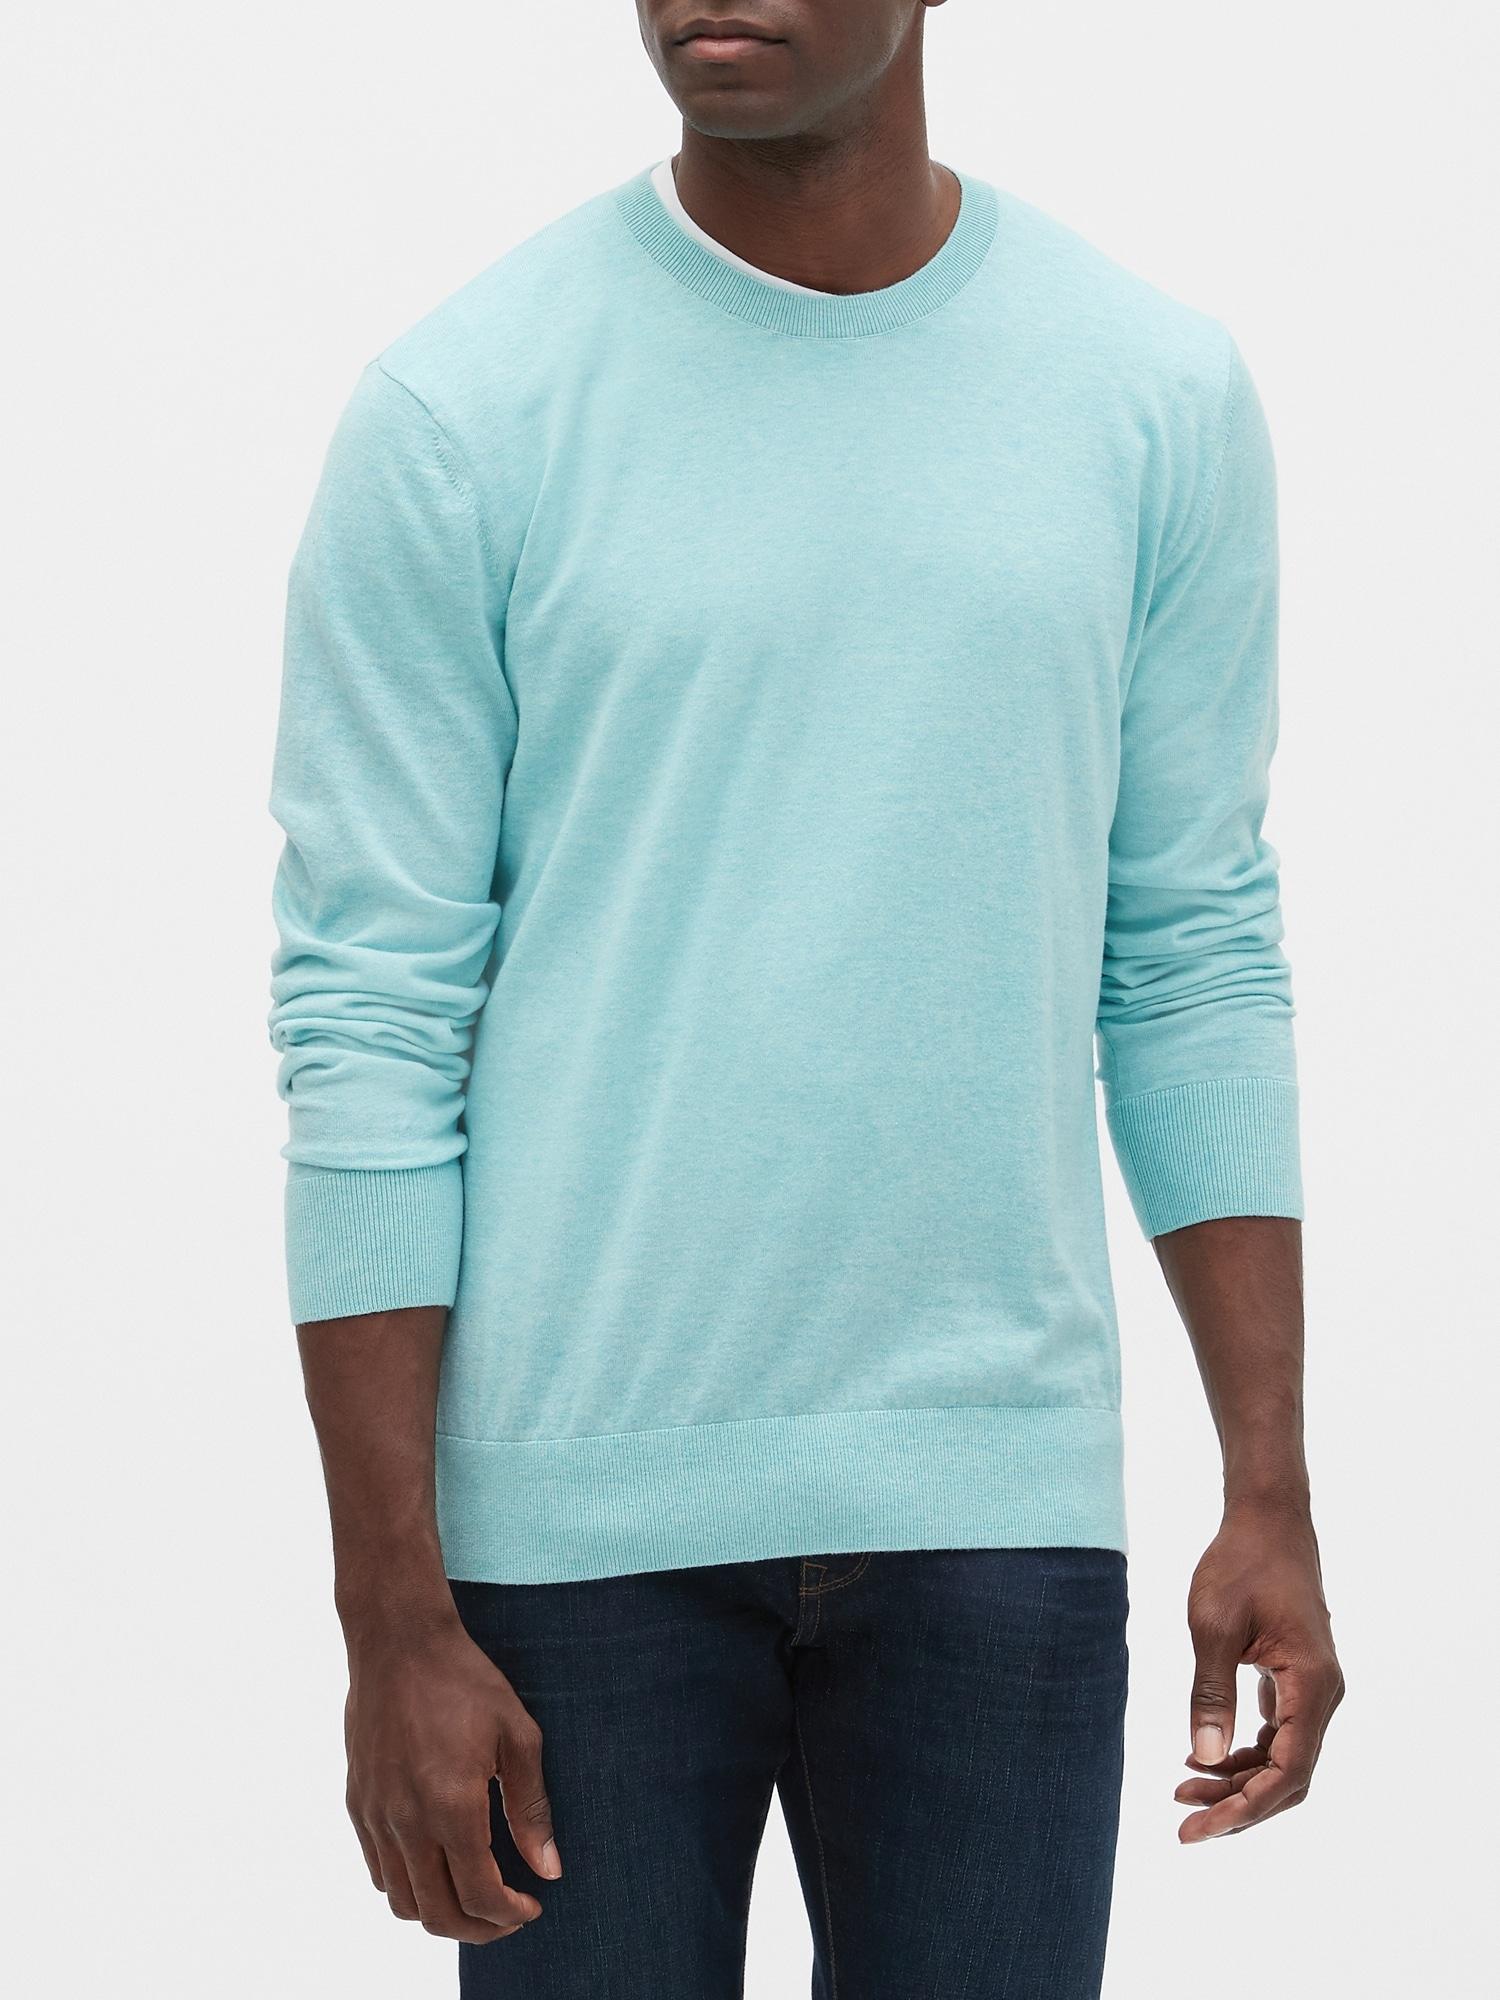 GAP Factory Crewneck Sweater in Blue for Men - Lyst